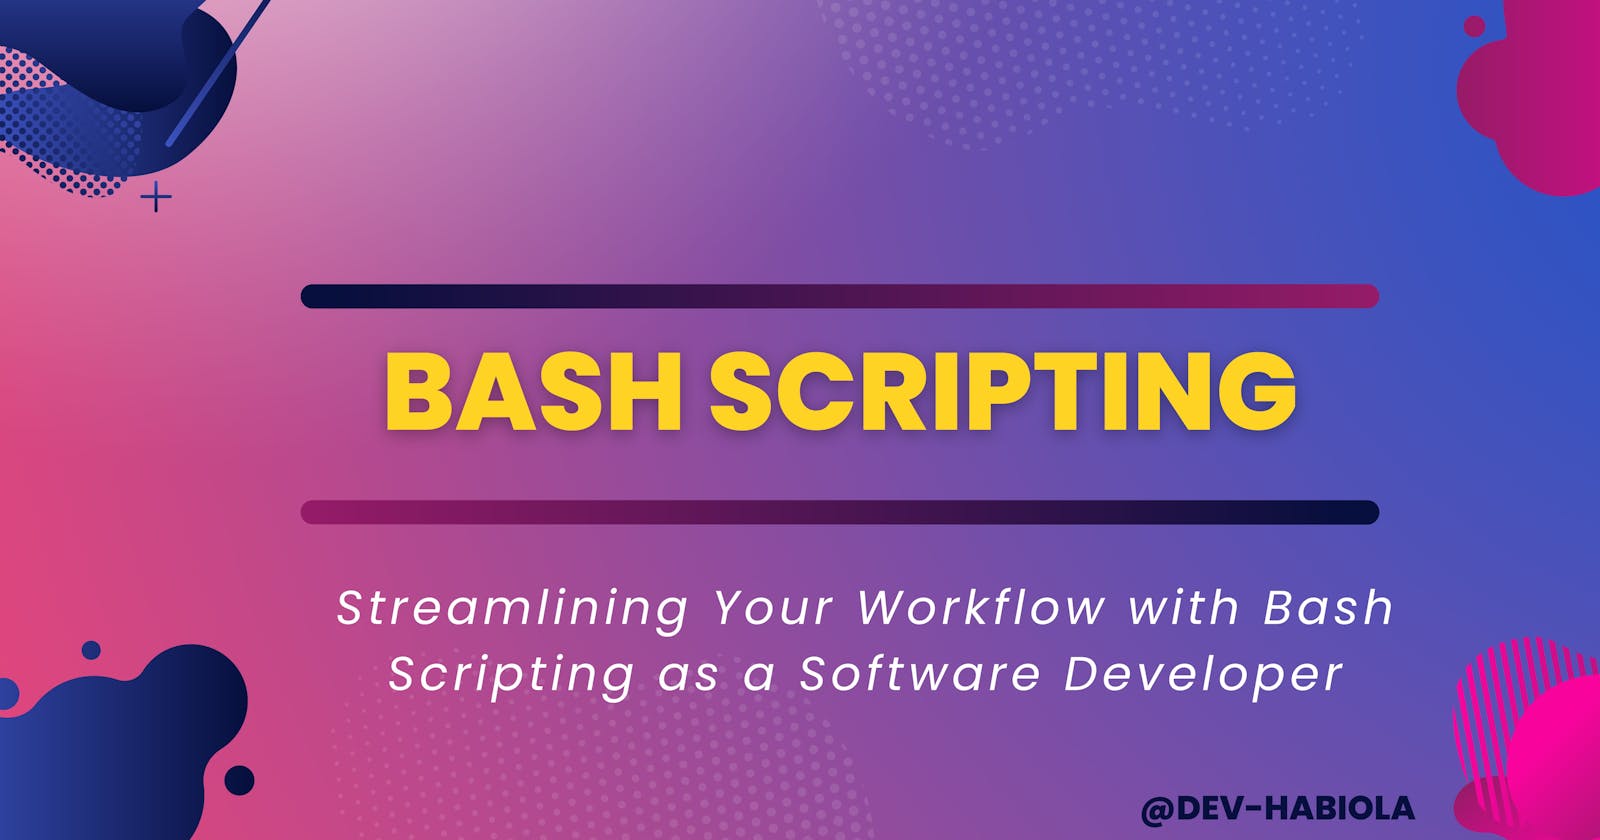 How to Use Bash Scripting to Automate Things as a Software Developer